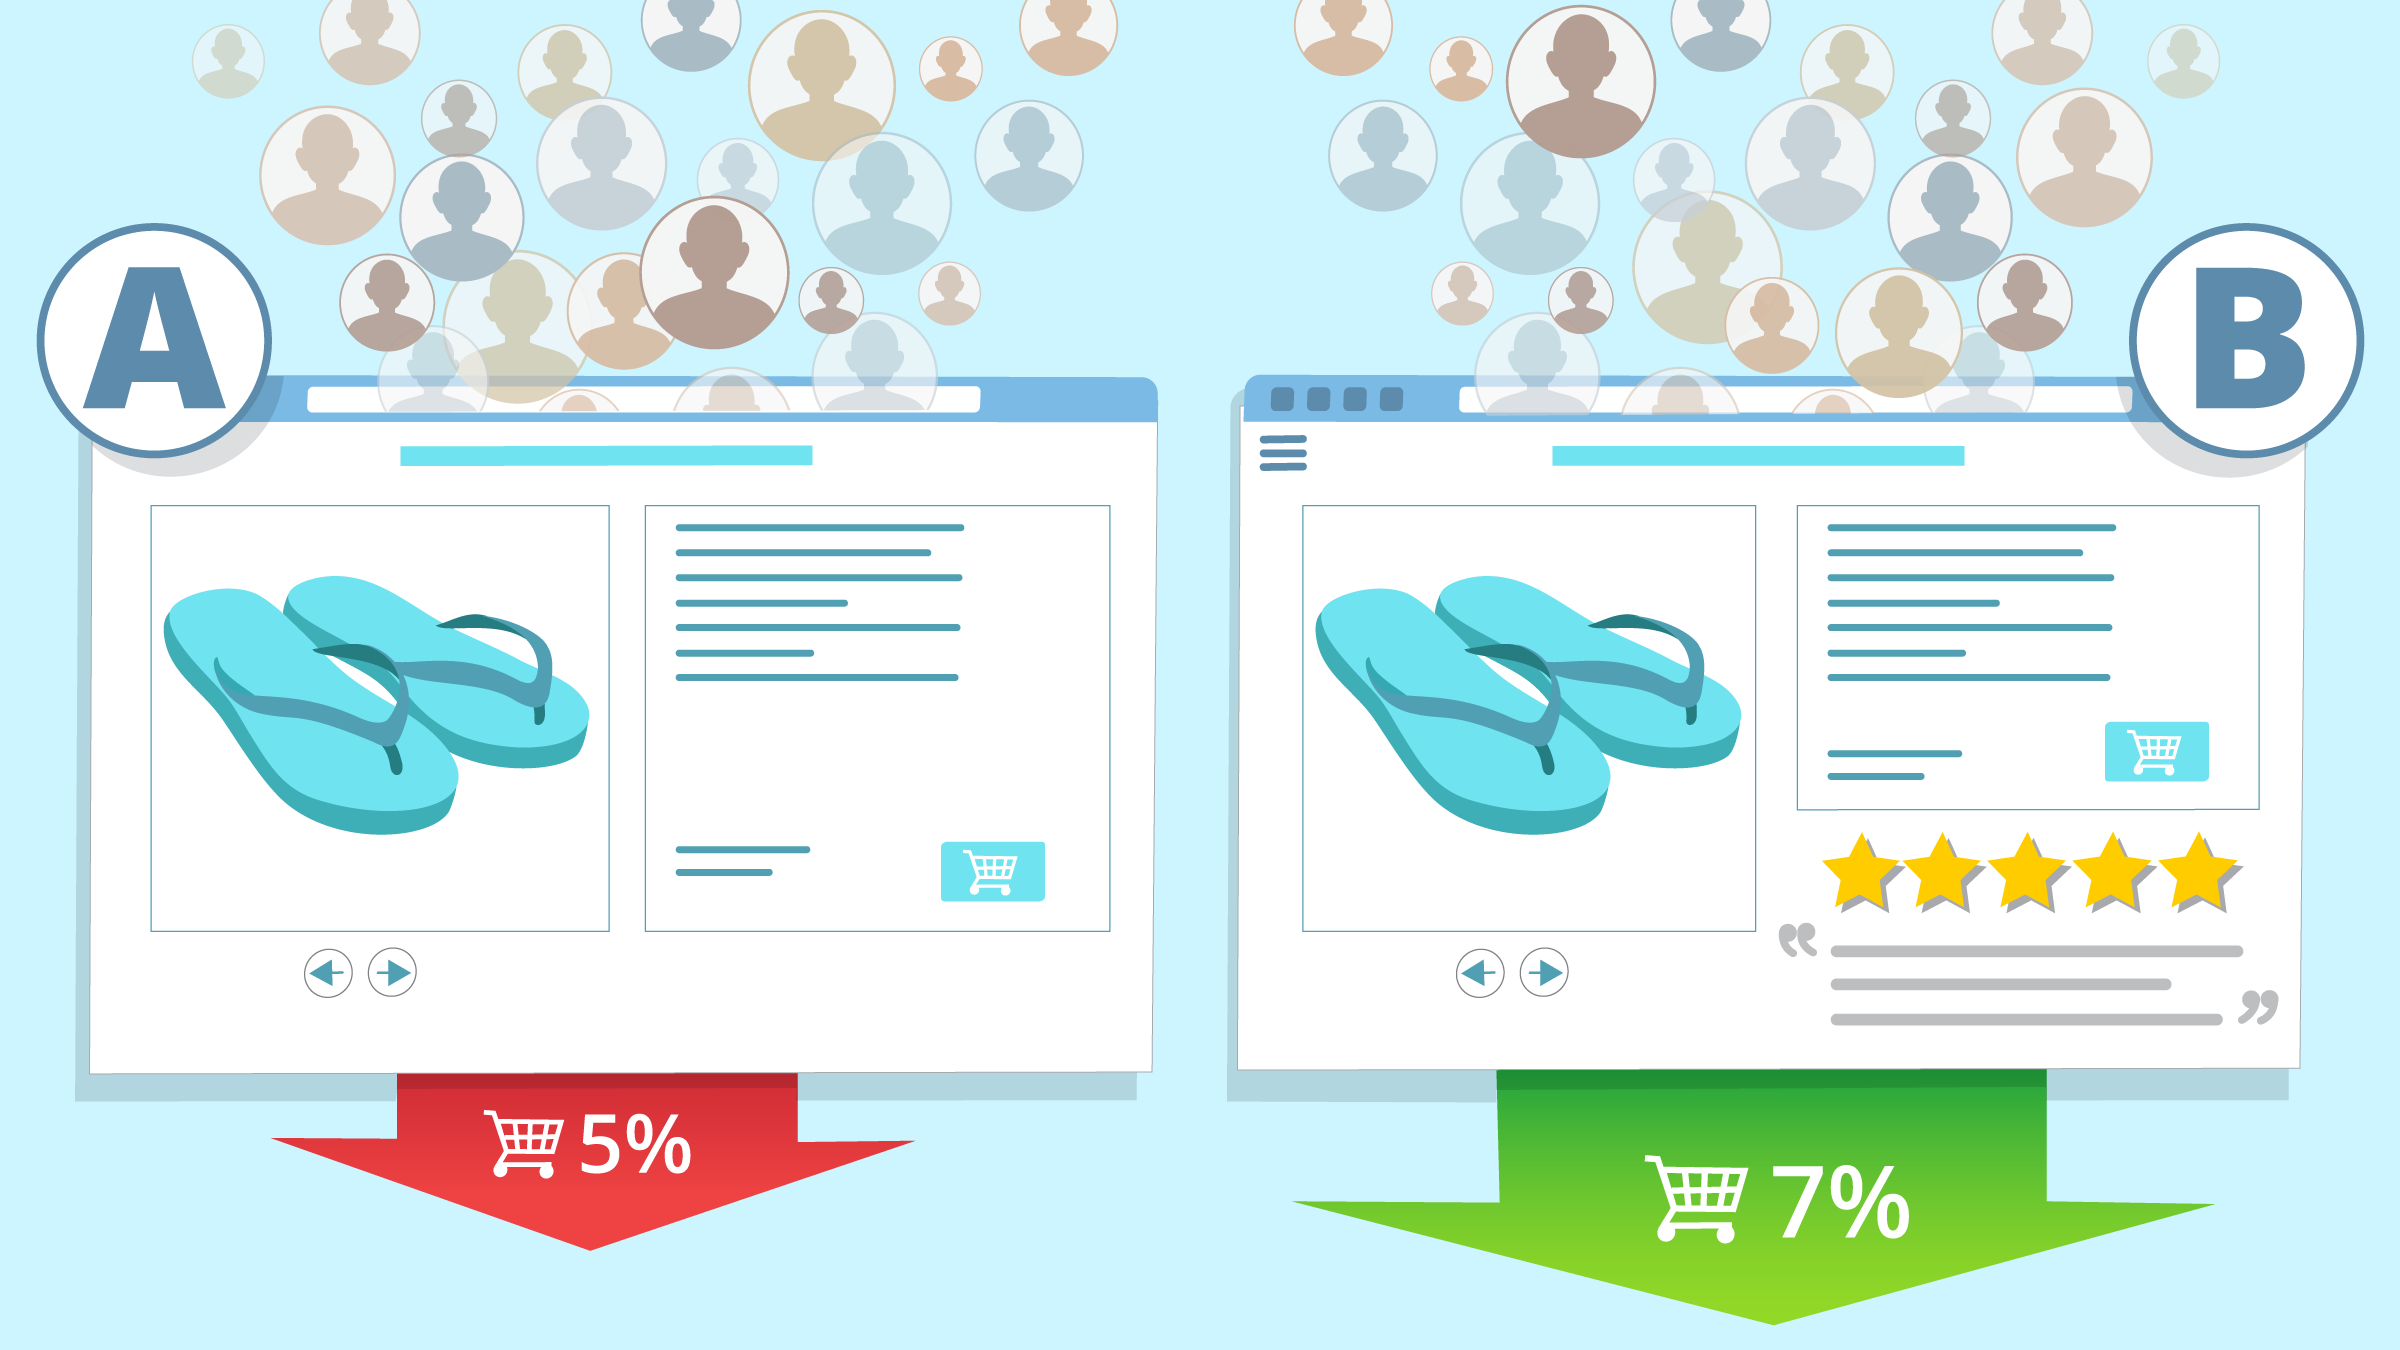 Showing two different product pages with equal amount of traffic, but variant A getting 5% and B 7% conversion rate